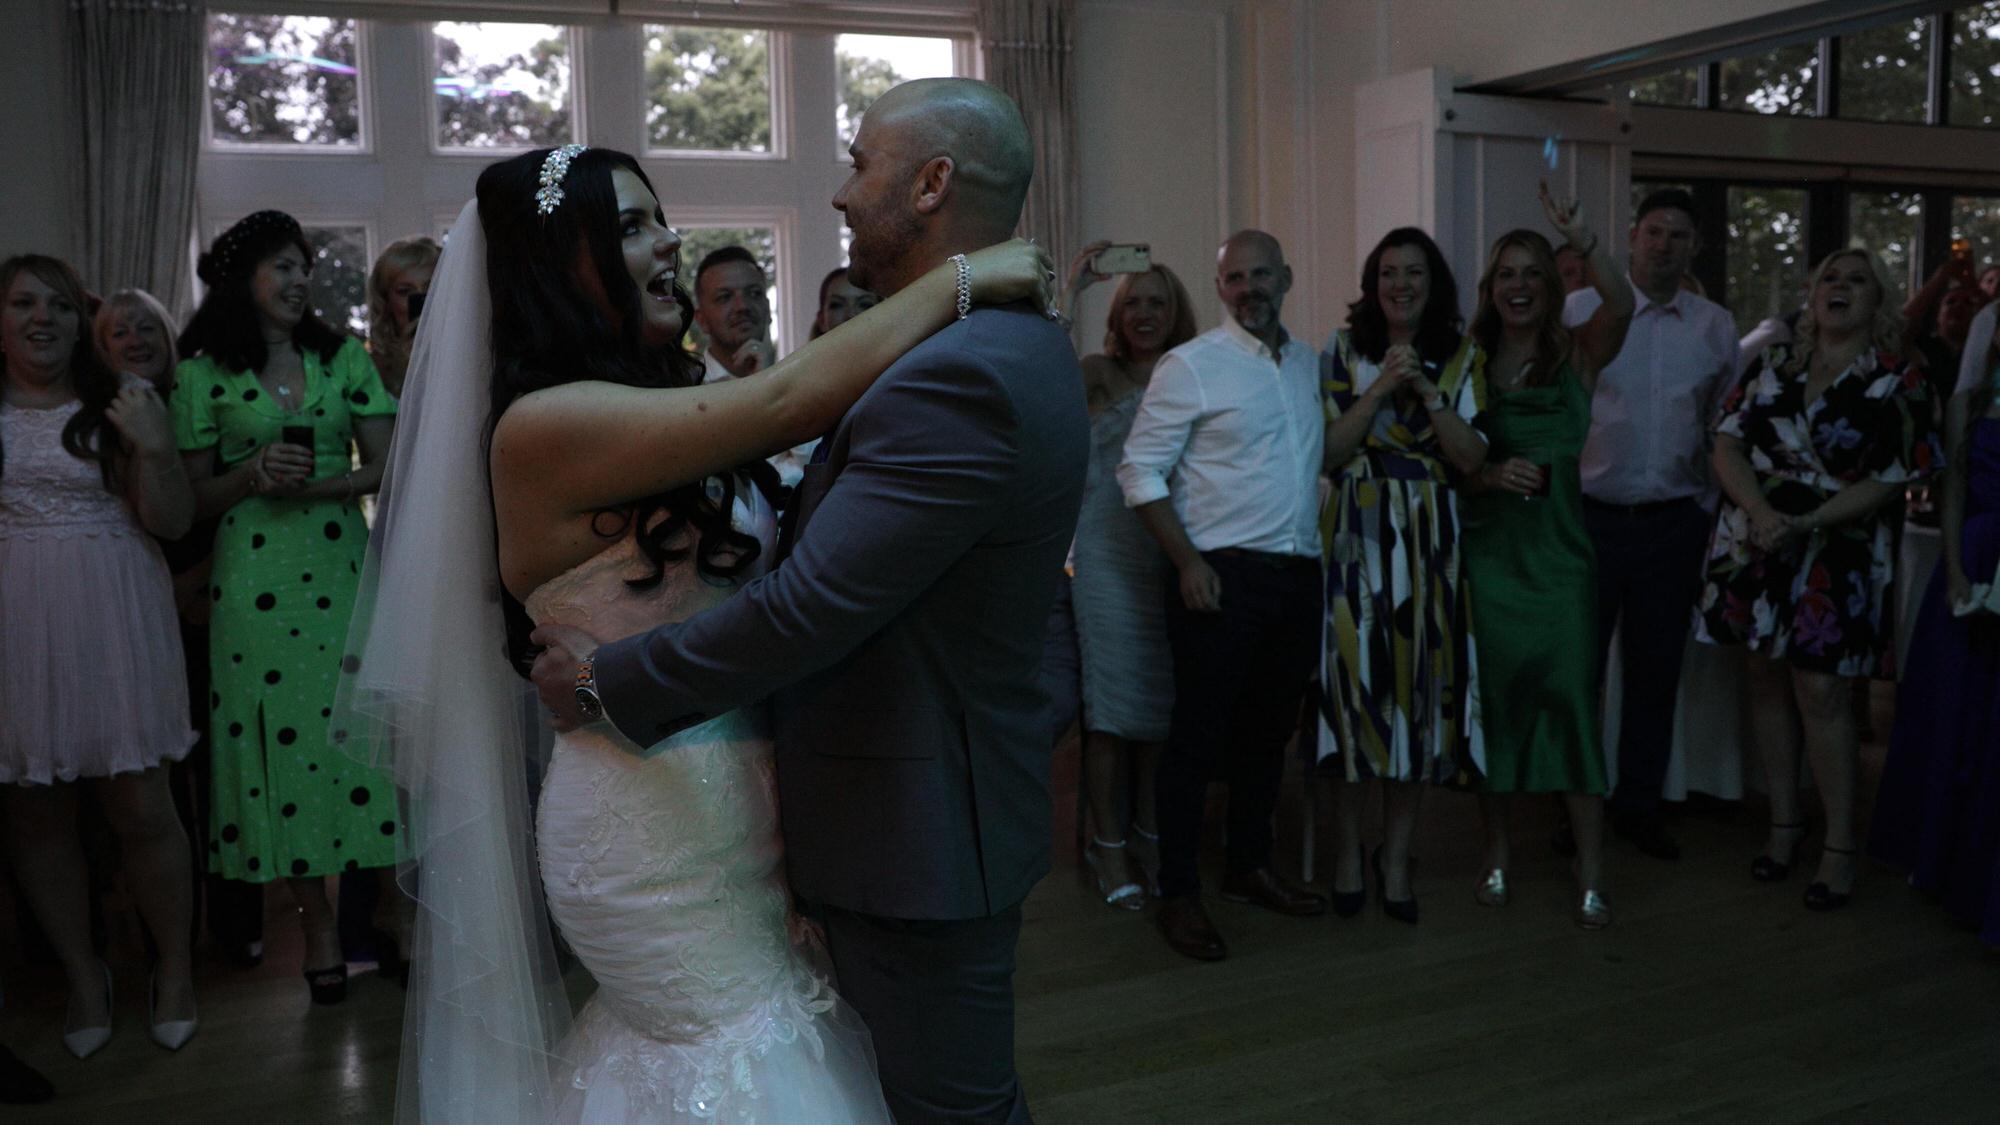 the couple sing to each other during the first dance